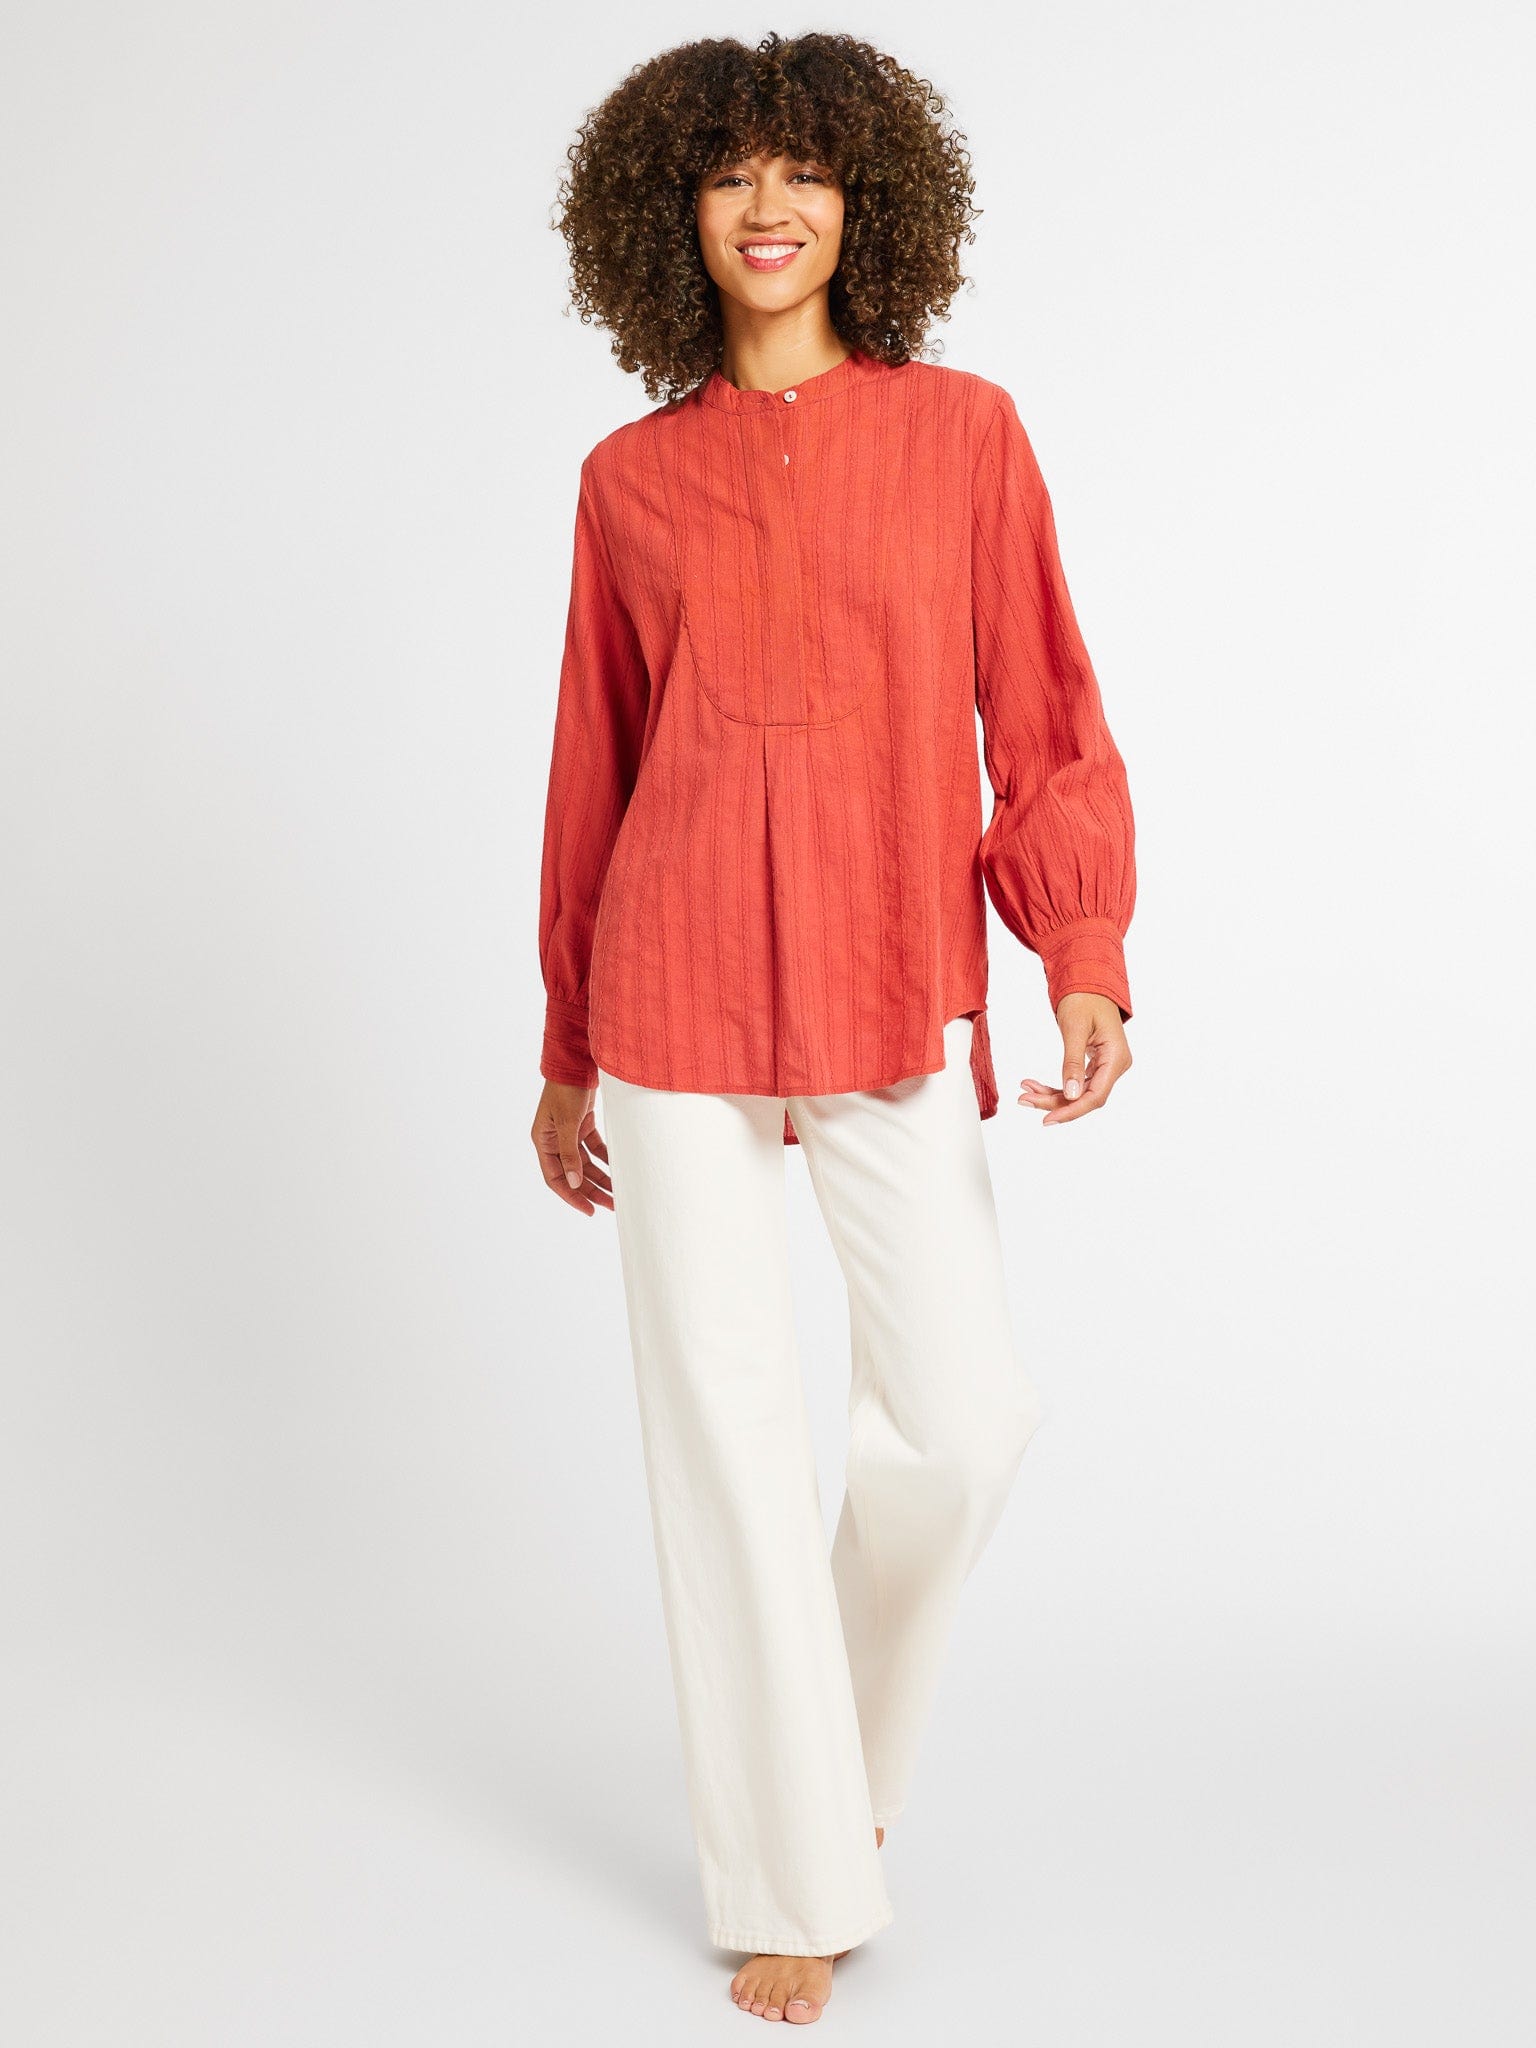 MILLE Clothing Tilda Top in Spice